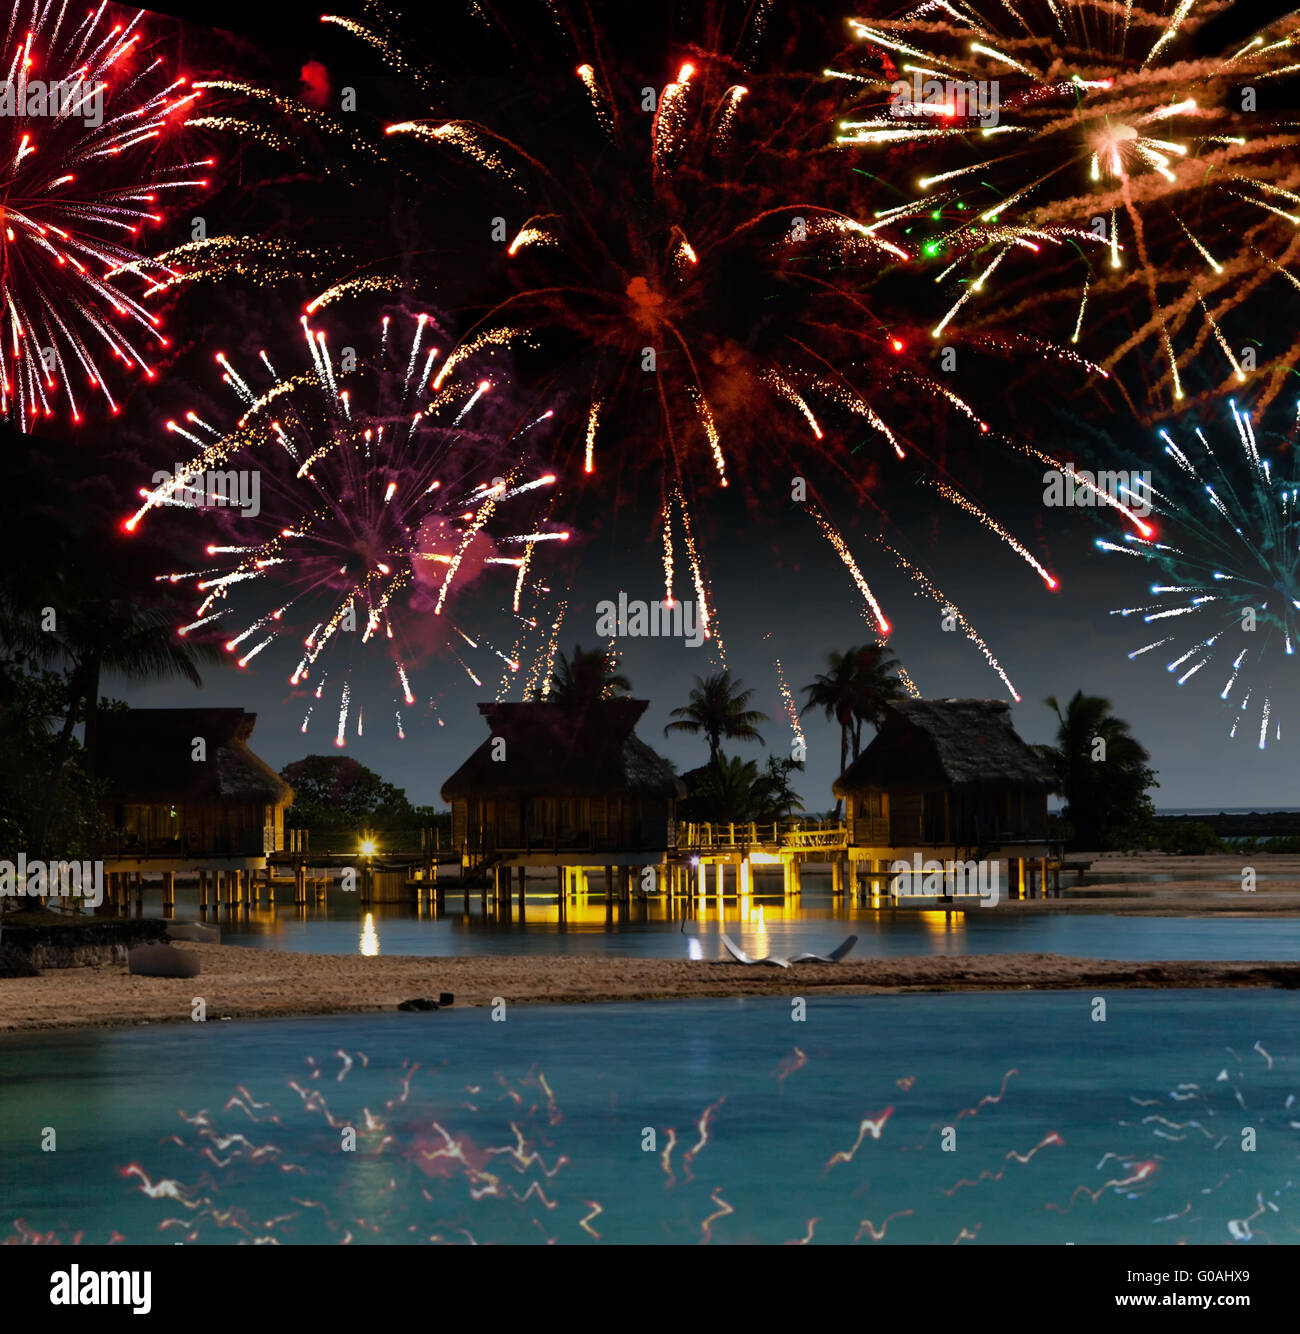 New Year's fireworks over the tropical island Stock Photo Alamy